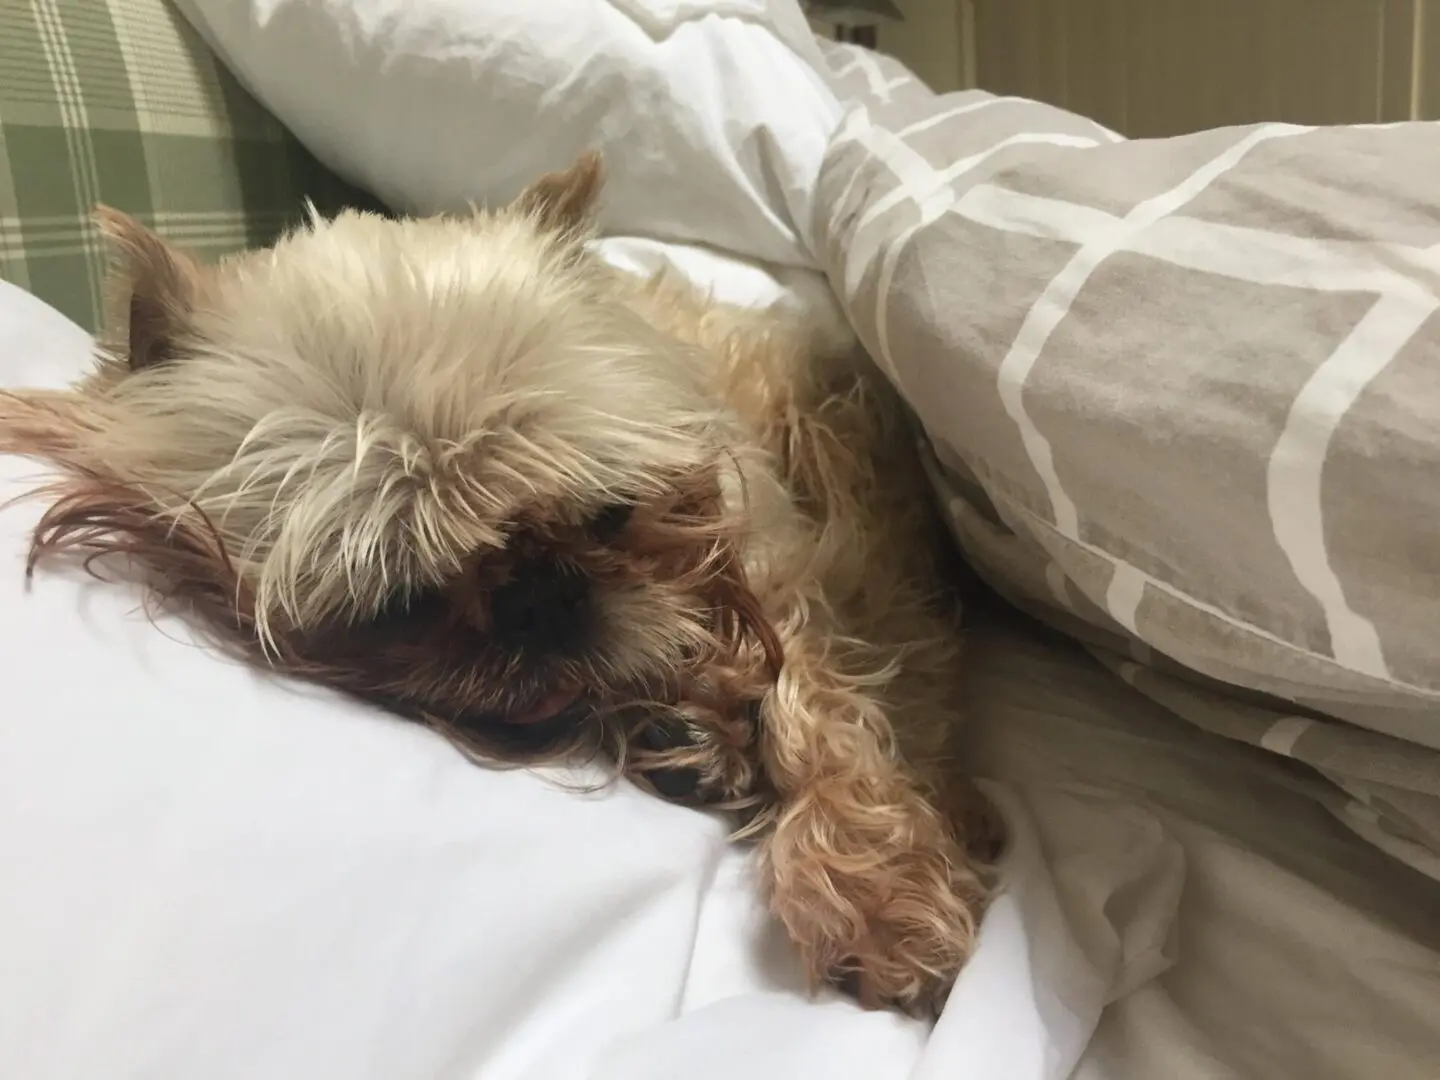 A Brussels Griffon sleeping while covered by a comforter